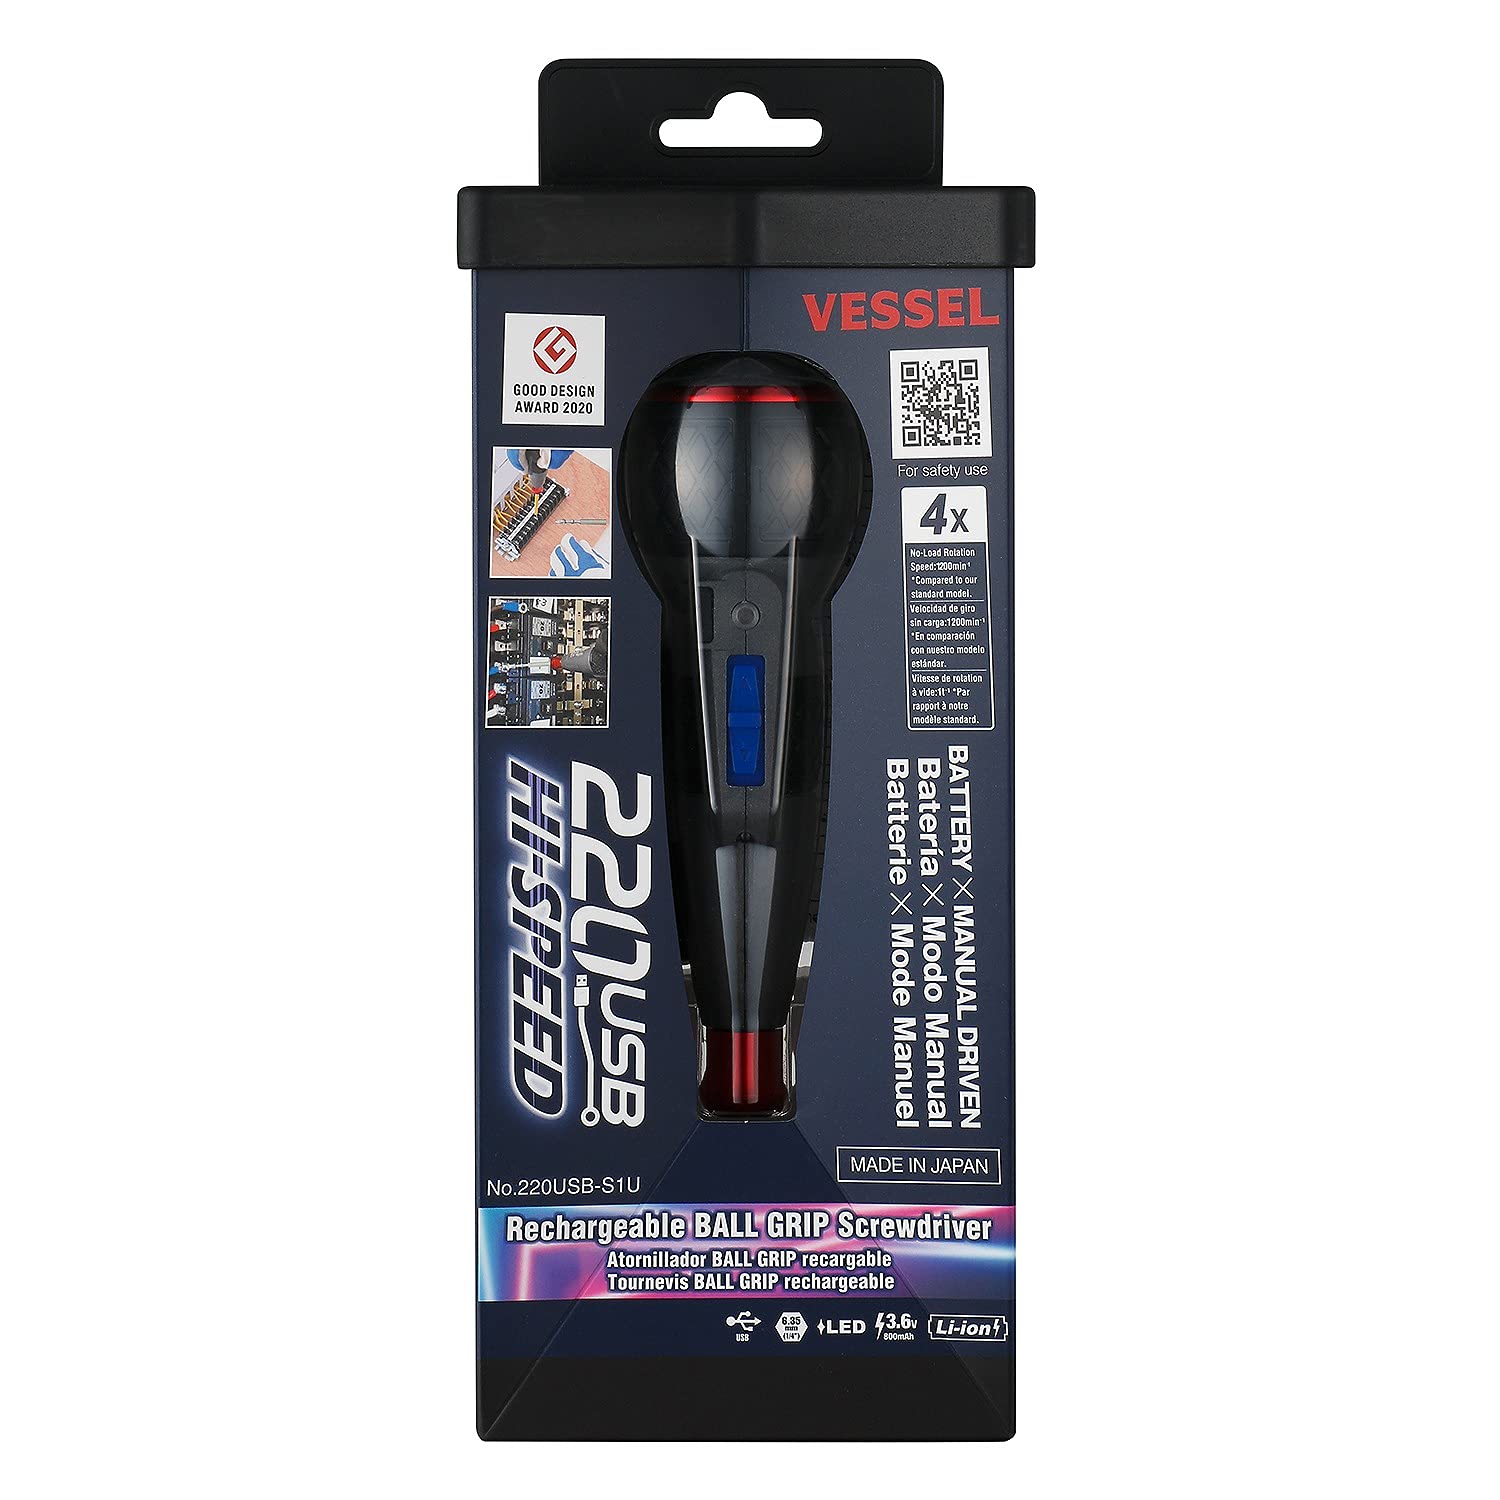 BALL GRIP Rechargeable Screwdriver Cordless (High Speed) No.220USB-S1U 220USBS1U Made in Japan by VESSEL